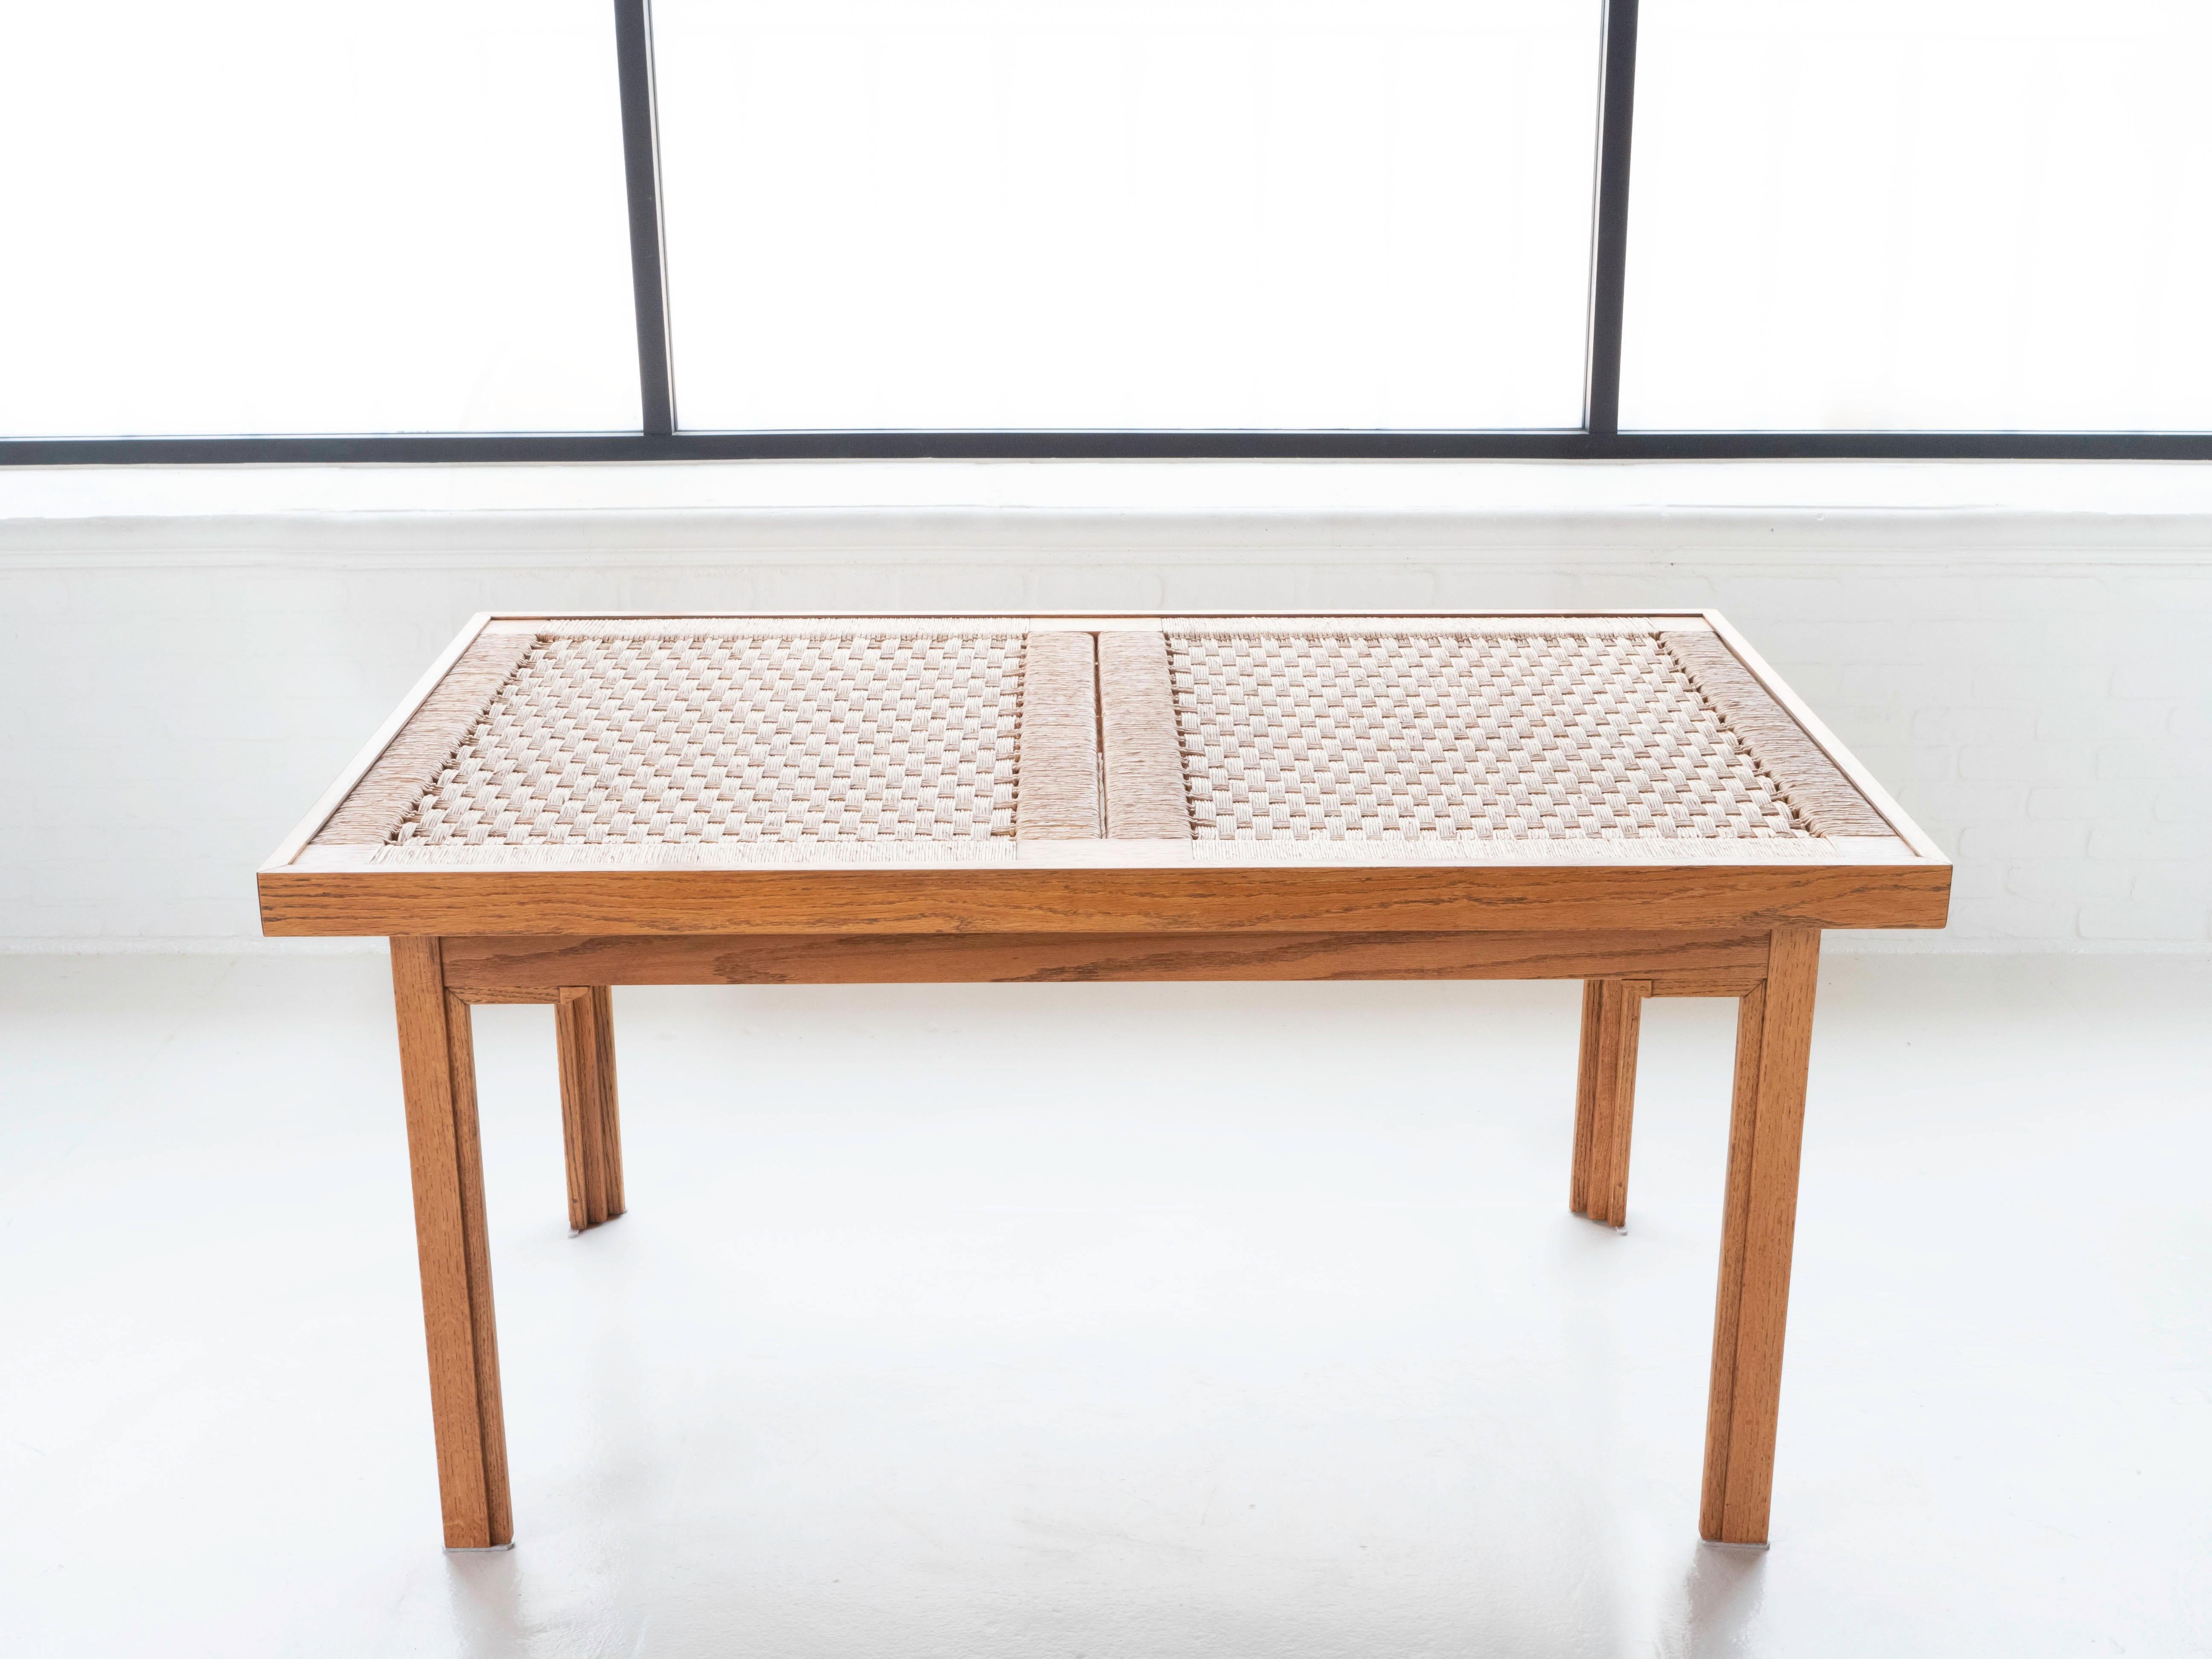 Solid oak base dining table with a woven palm cord top with glass cover.  Purchased by the original owners in the 1950's during a trip to Mexico City.  The design is in the style of Michael Van Beuren and Clara Porset.

The table has been lightly